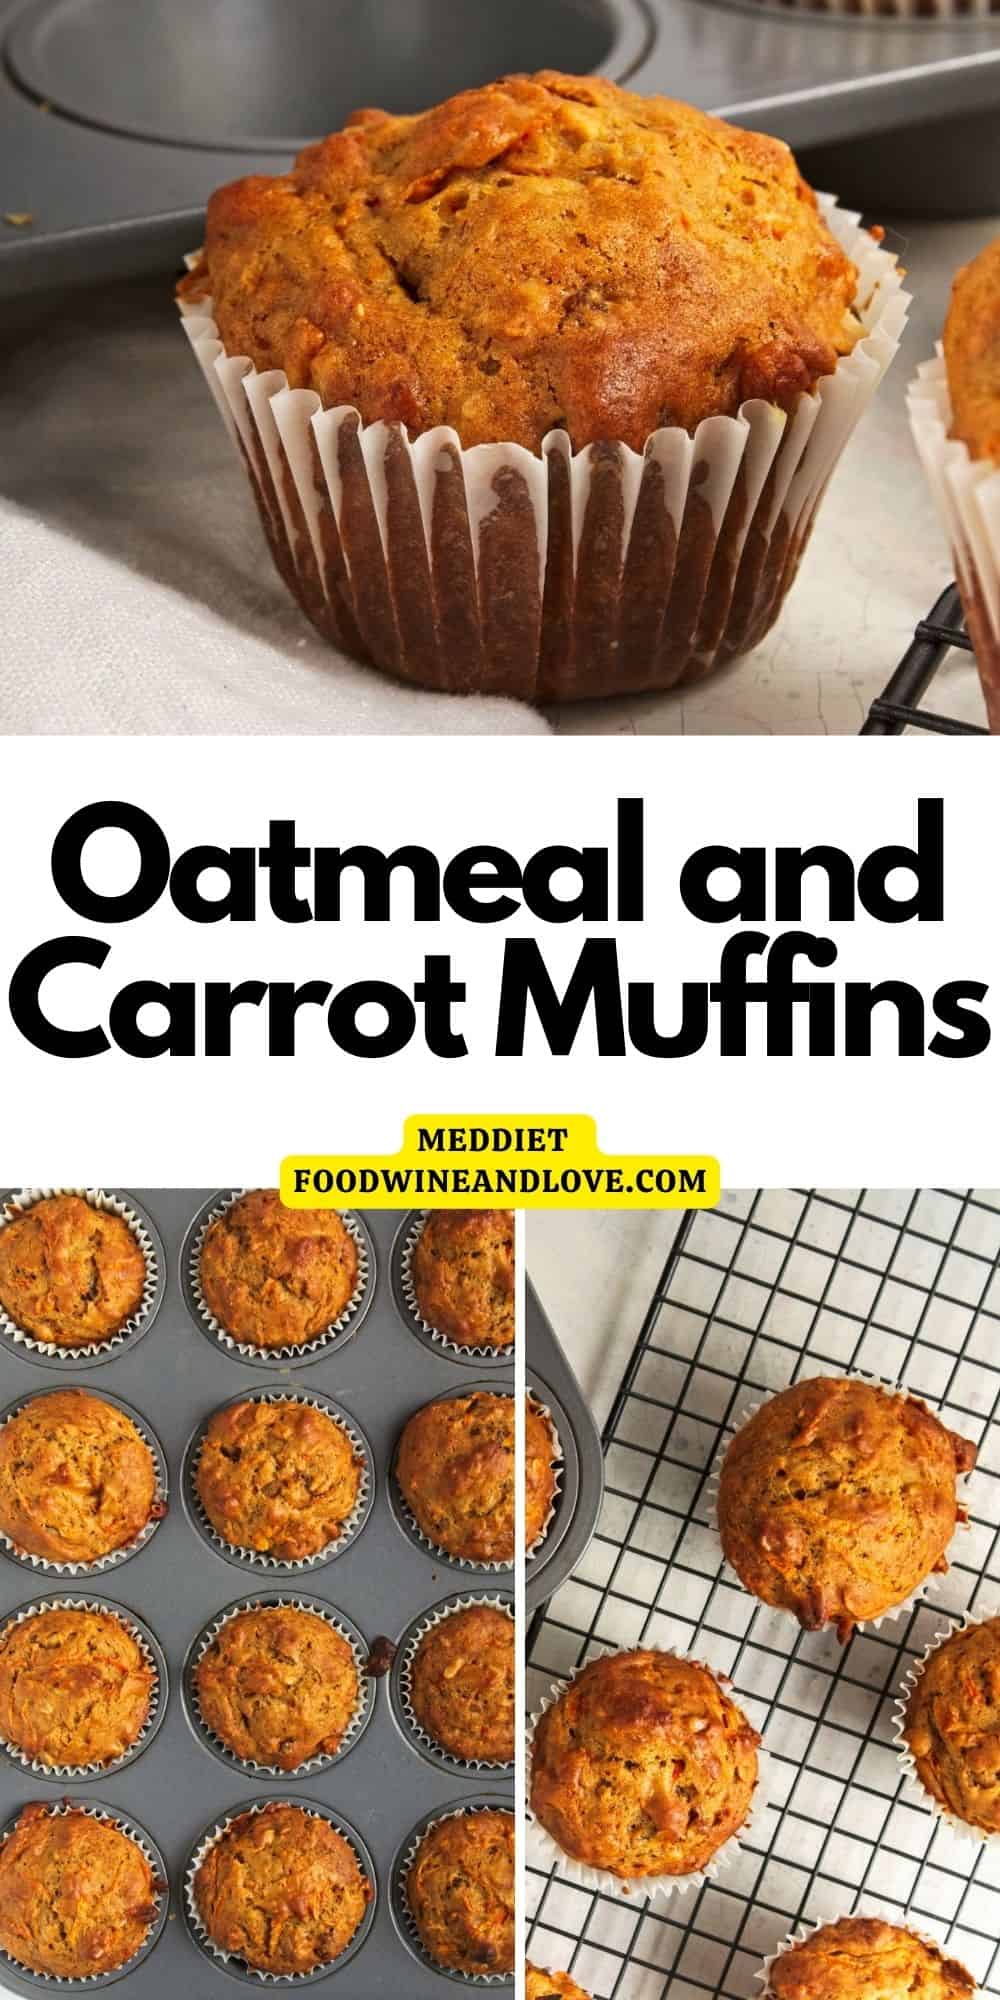 Easy Oatmeal and Carrot Muffin Recipe, a delicious breakfast or brunch recipe made with healthy oats and carrots